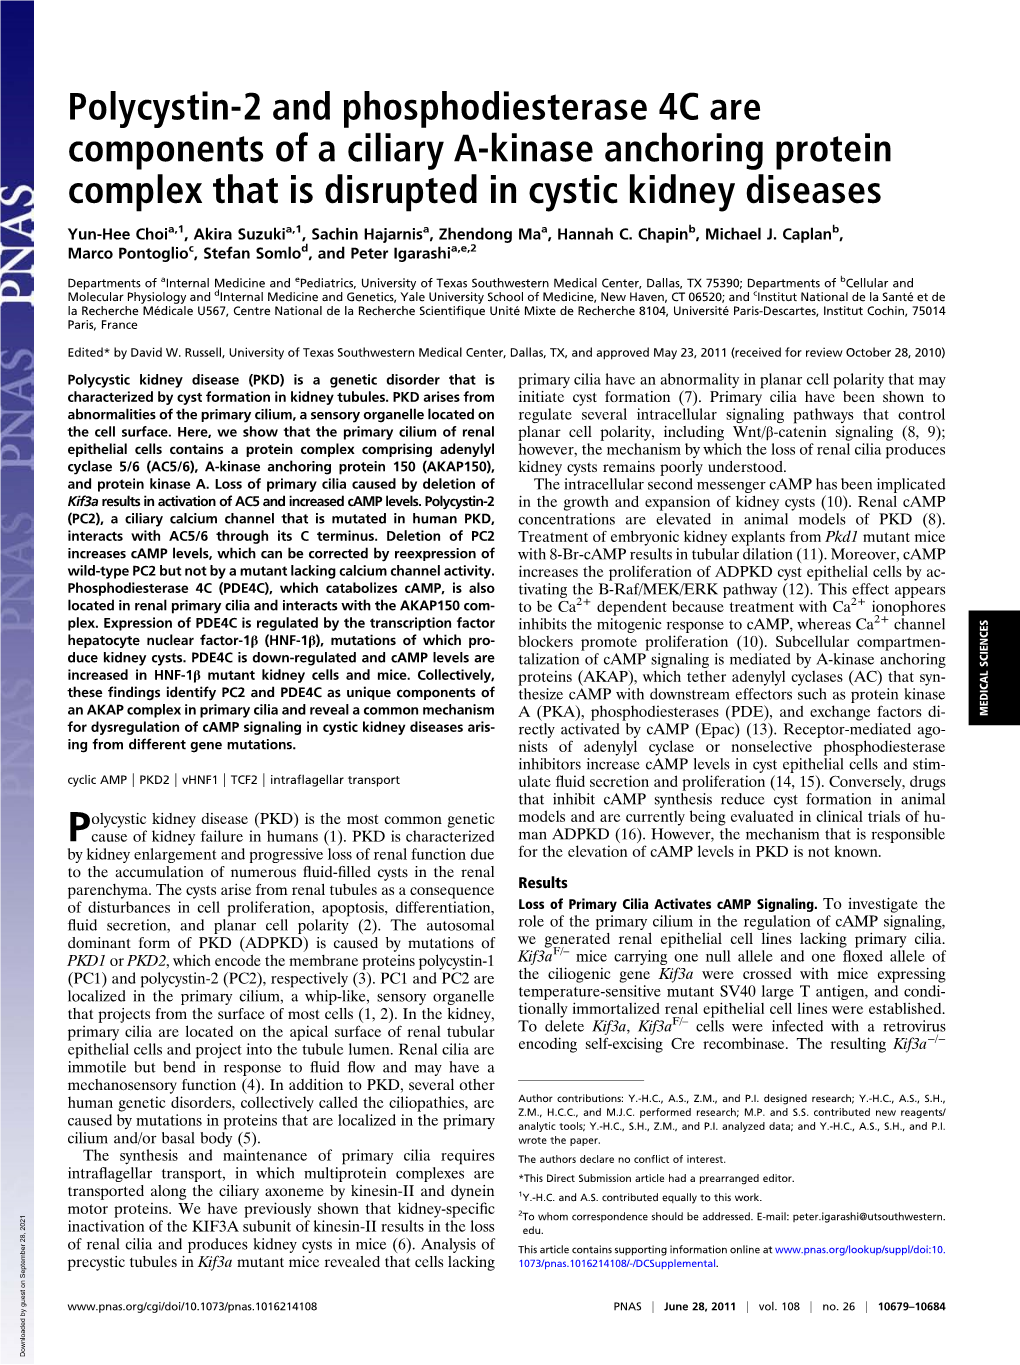 Polycystin-2 and Phosphodiesterase 4C Are Components of a Ciliary A-Kinase Anchoring Protein Complex That Is Disrupted in Cystic Kidney Diseases